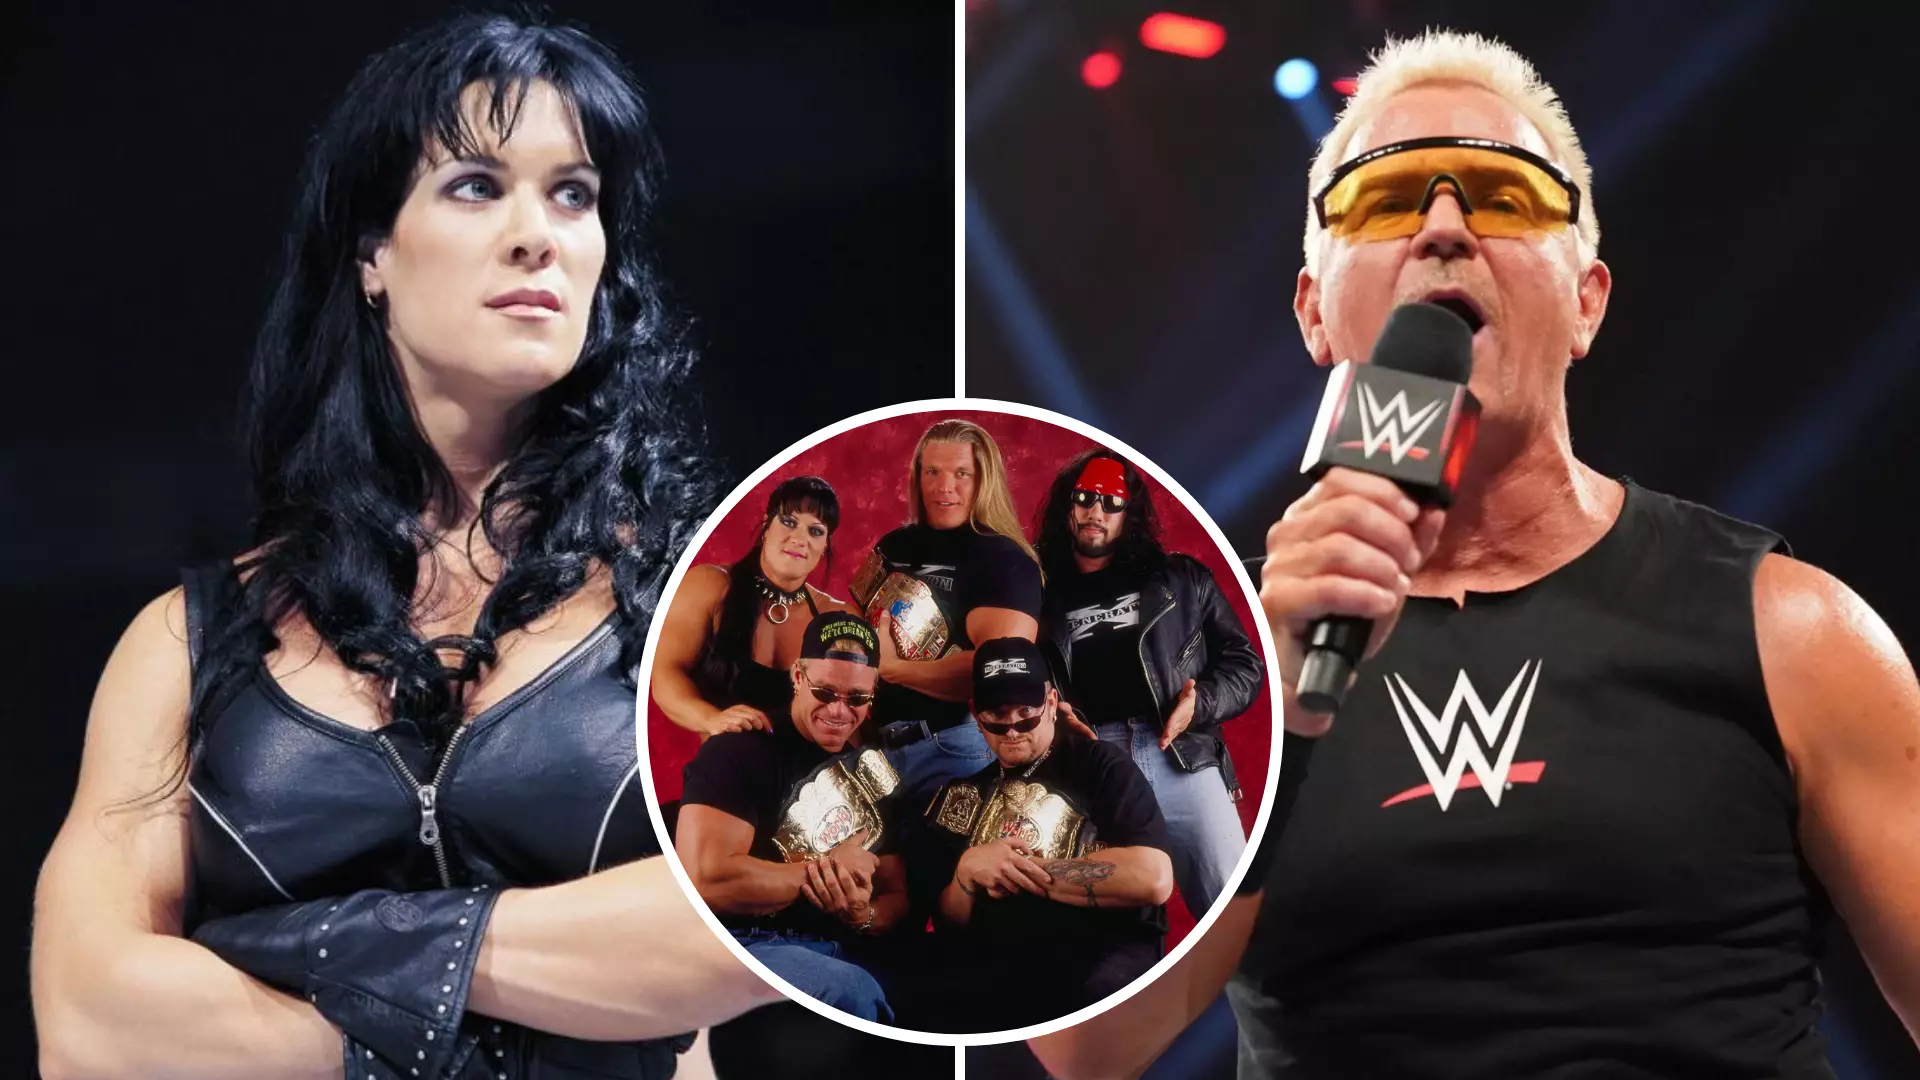 Jeff Jarrett Says Chyna Was 'Very Deserving' To Go Into WWE Hall Of Fame